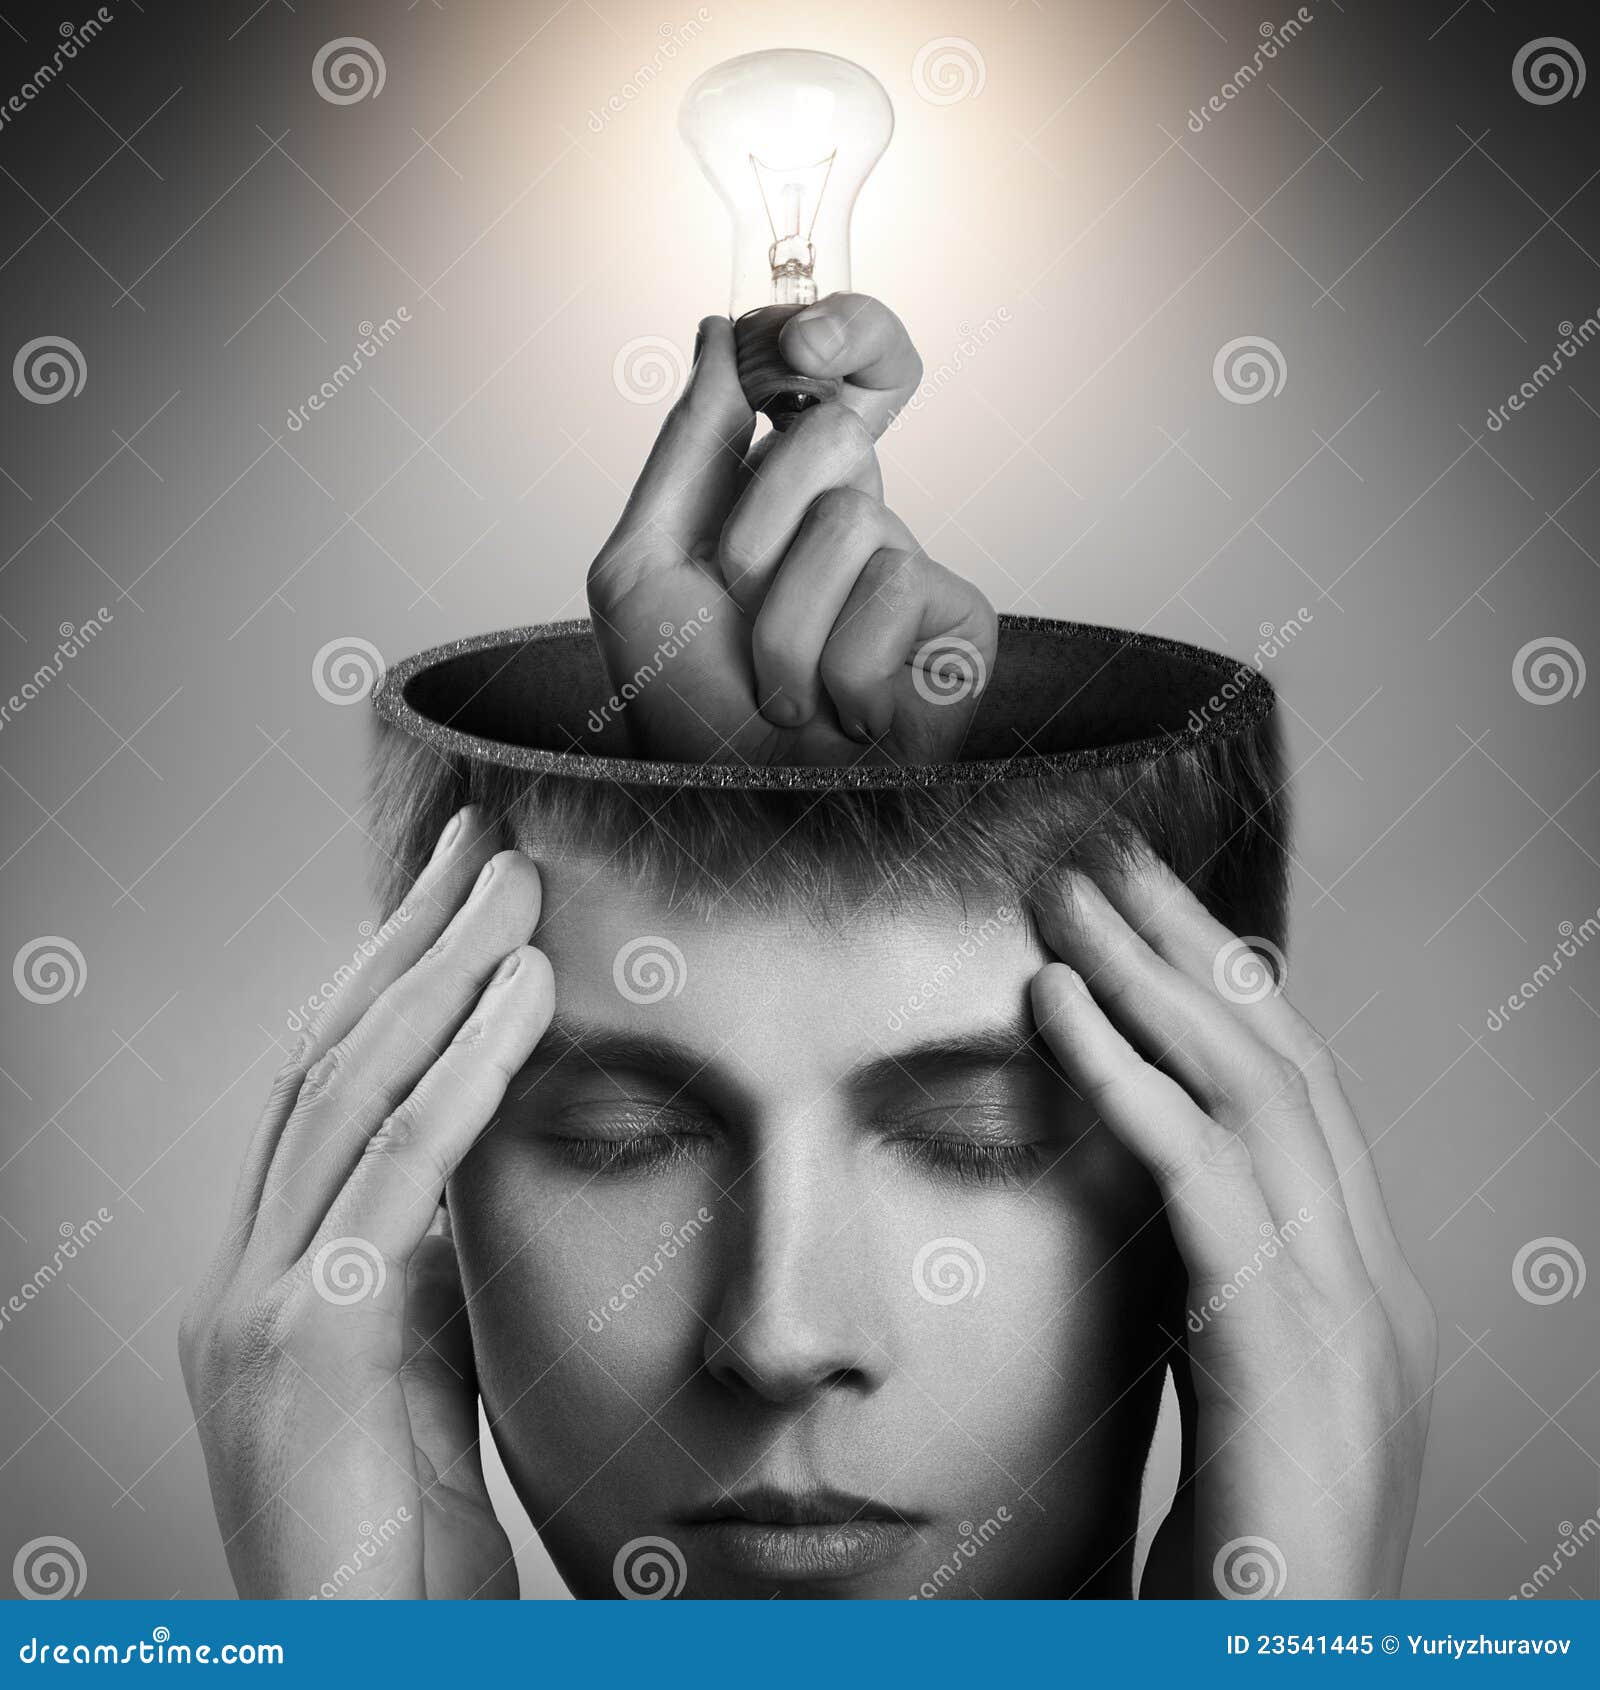 conceptual image of a open minded man